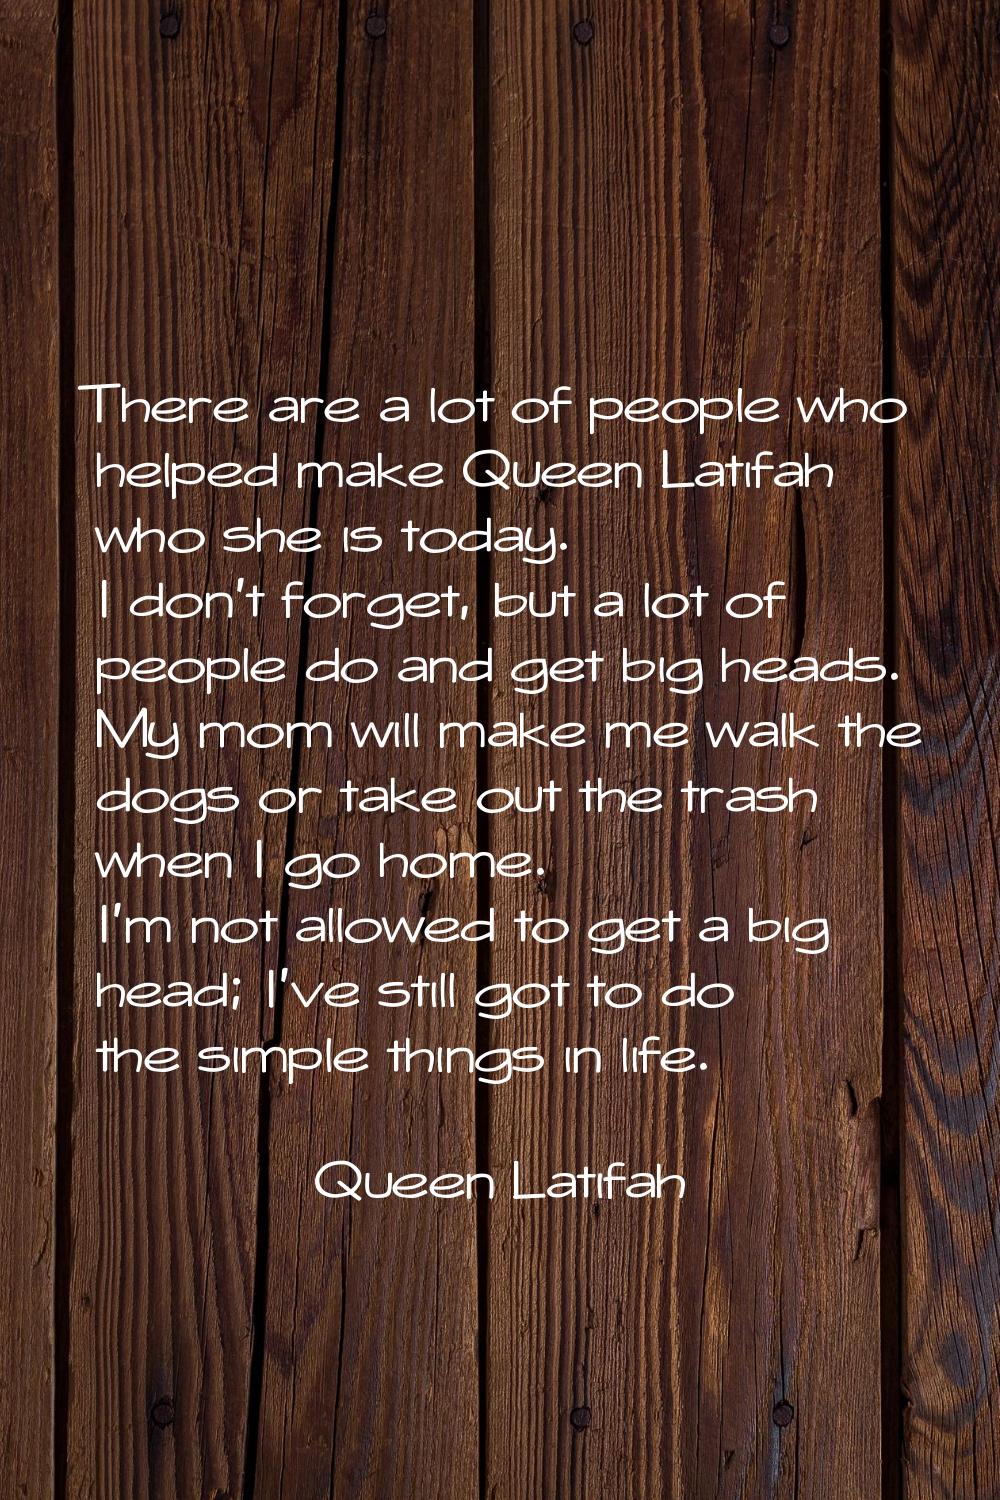 There are a lot of people who helped make Queen Latifah who she is today. I don't forget, but a lot